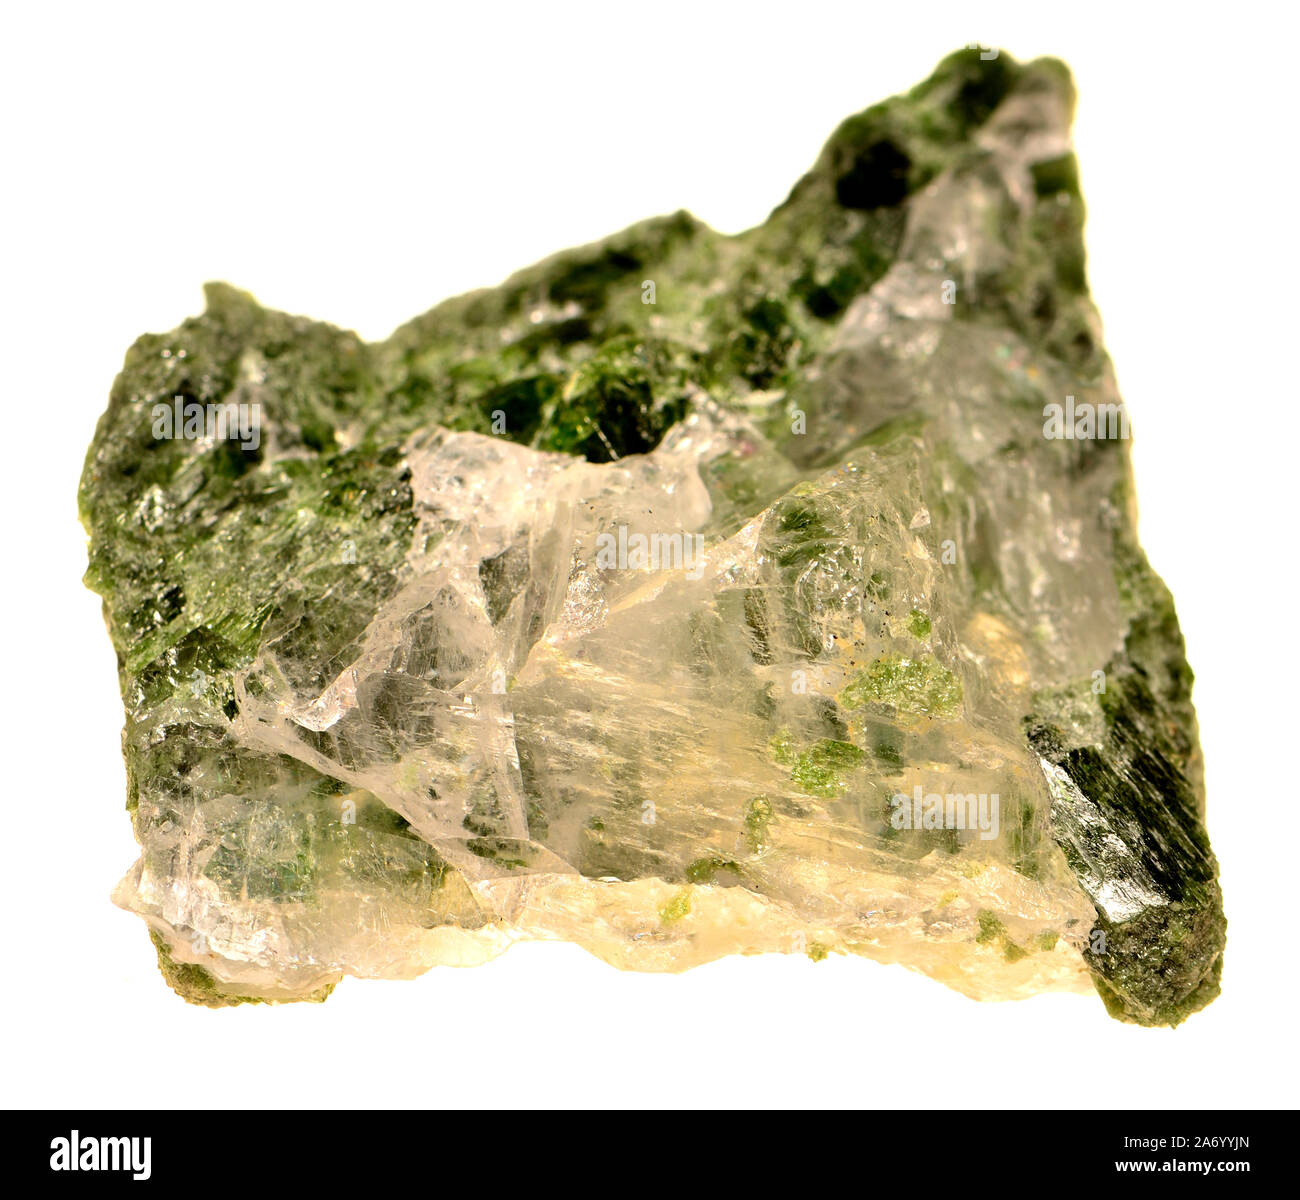 Diopside with Quartz Rock, Tumbling diopside